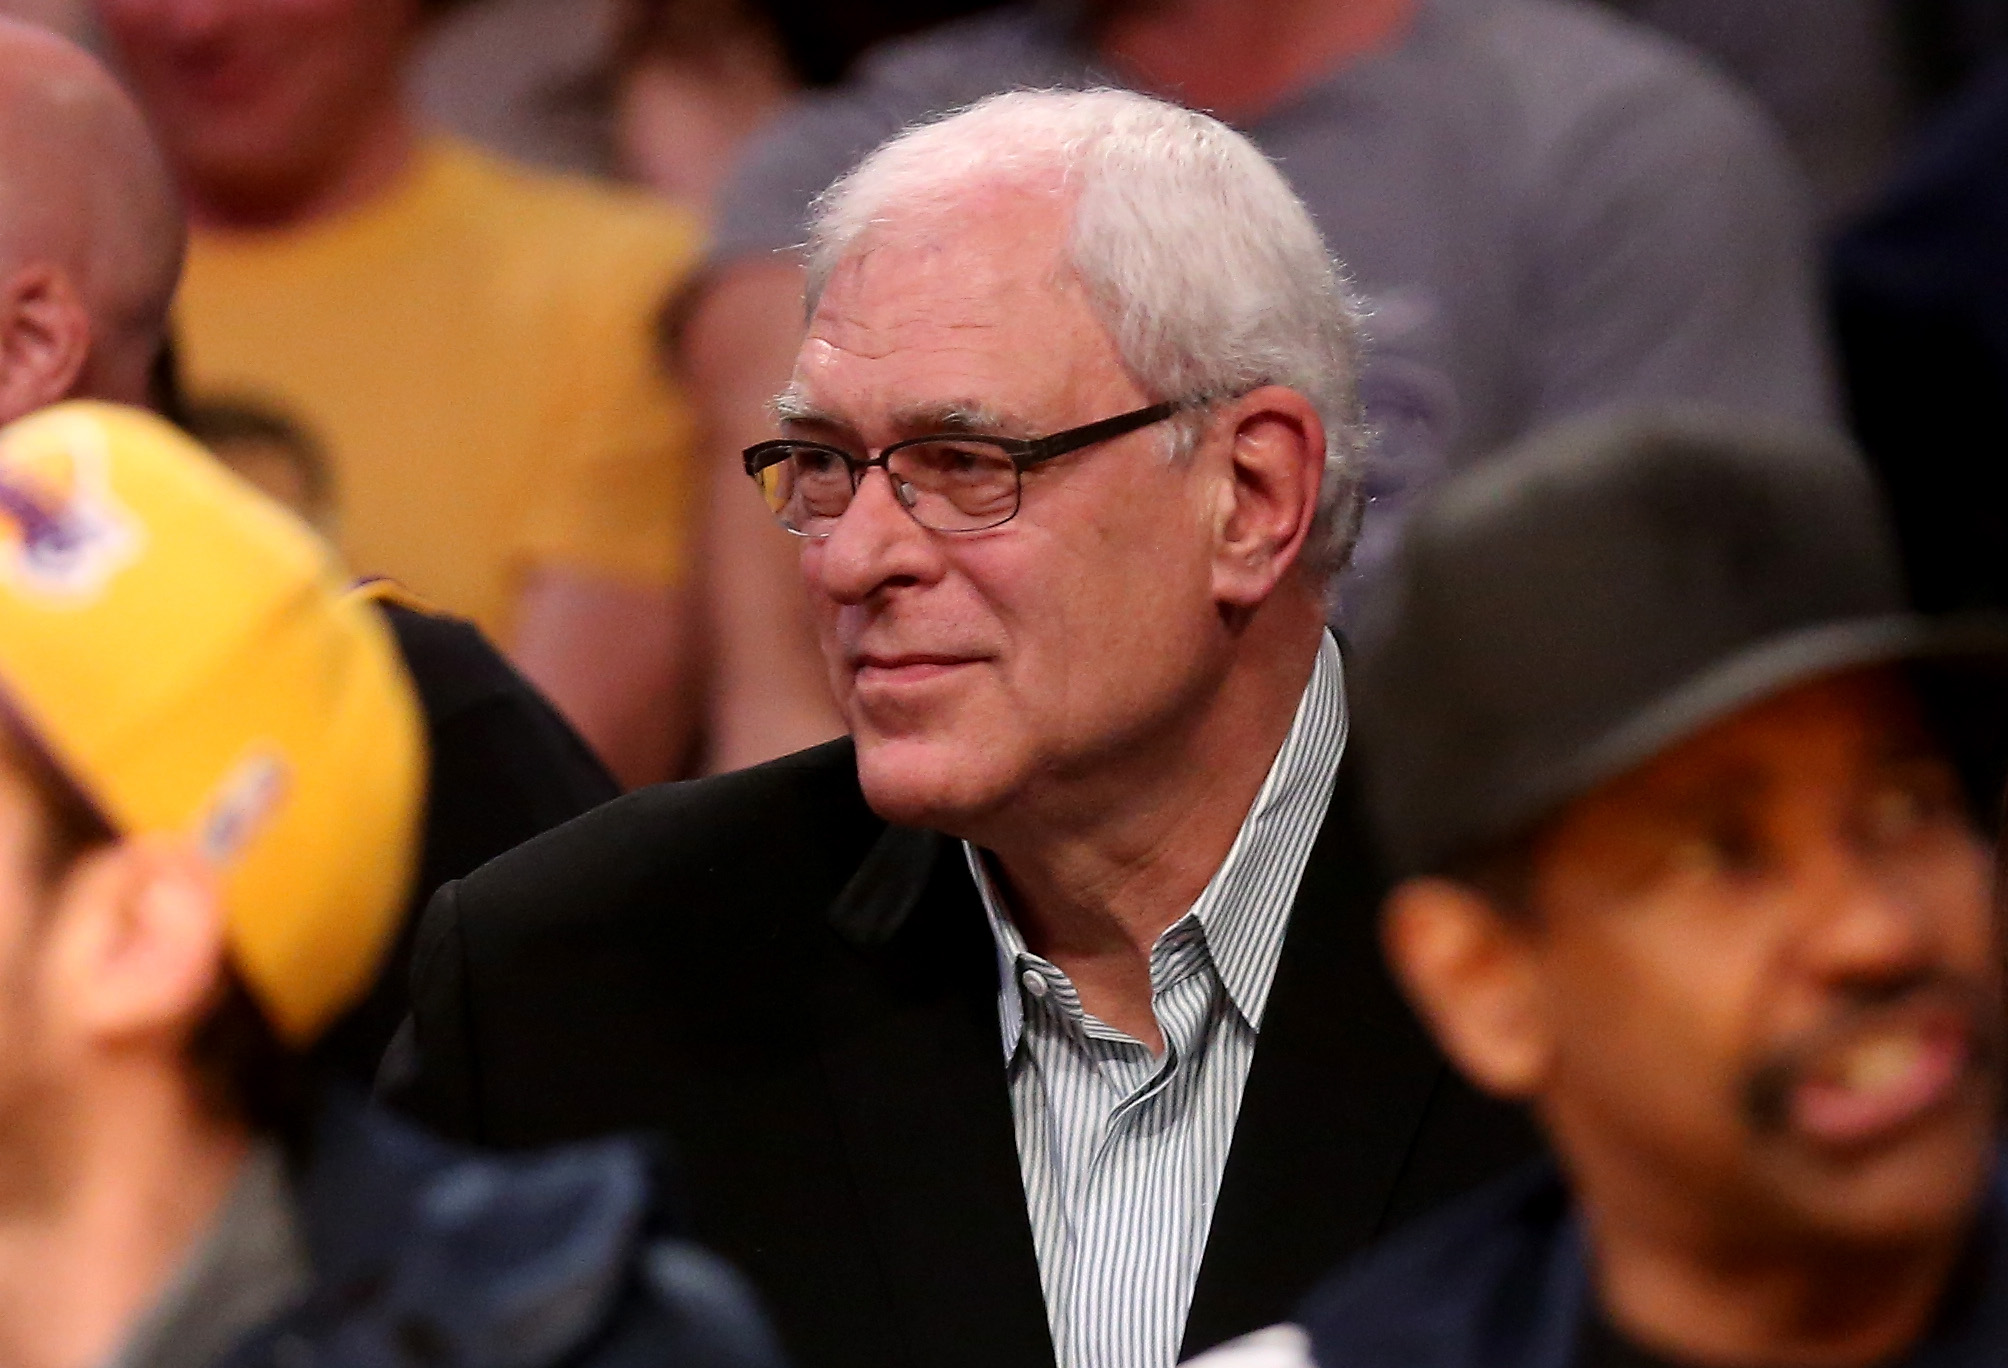 Phil Jackson, the legendary NBA coach, believes that the league has become too political to enjoy. He thinks that the focus on social justice issues has taken away from the game itself, making it less entertaining for fans. Jackson’s comments have sparked a debate about the role of politics in sports and whether it’s possible to separate the two. Despite the controversy, one thing is clear: the NBA is more than just a game. It’s a platform for athletes to speak out on important issues and make a difference in the world.